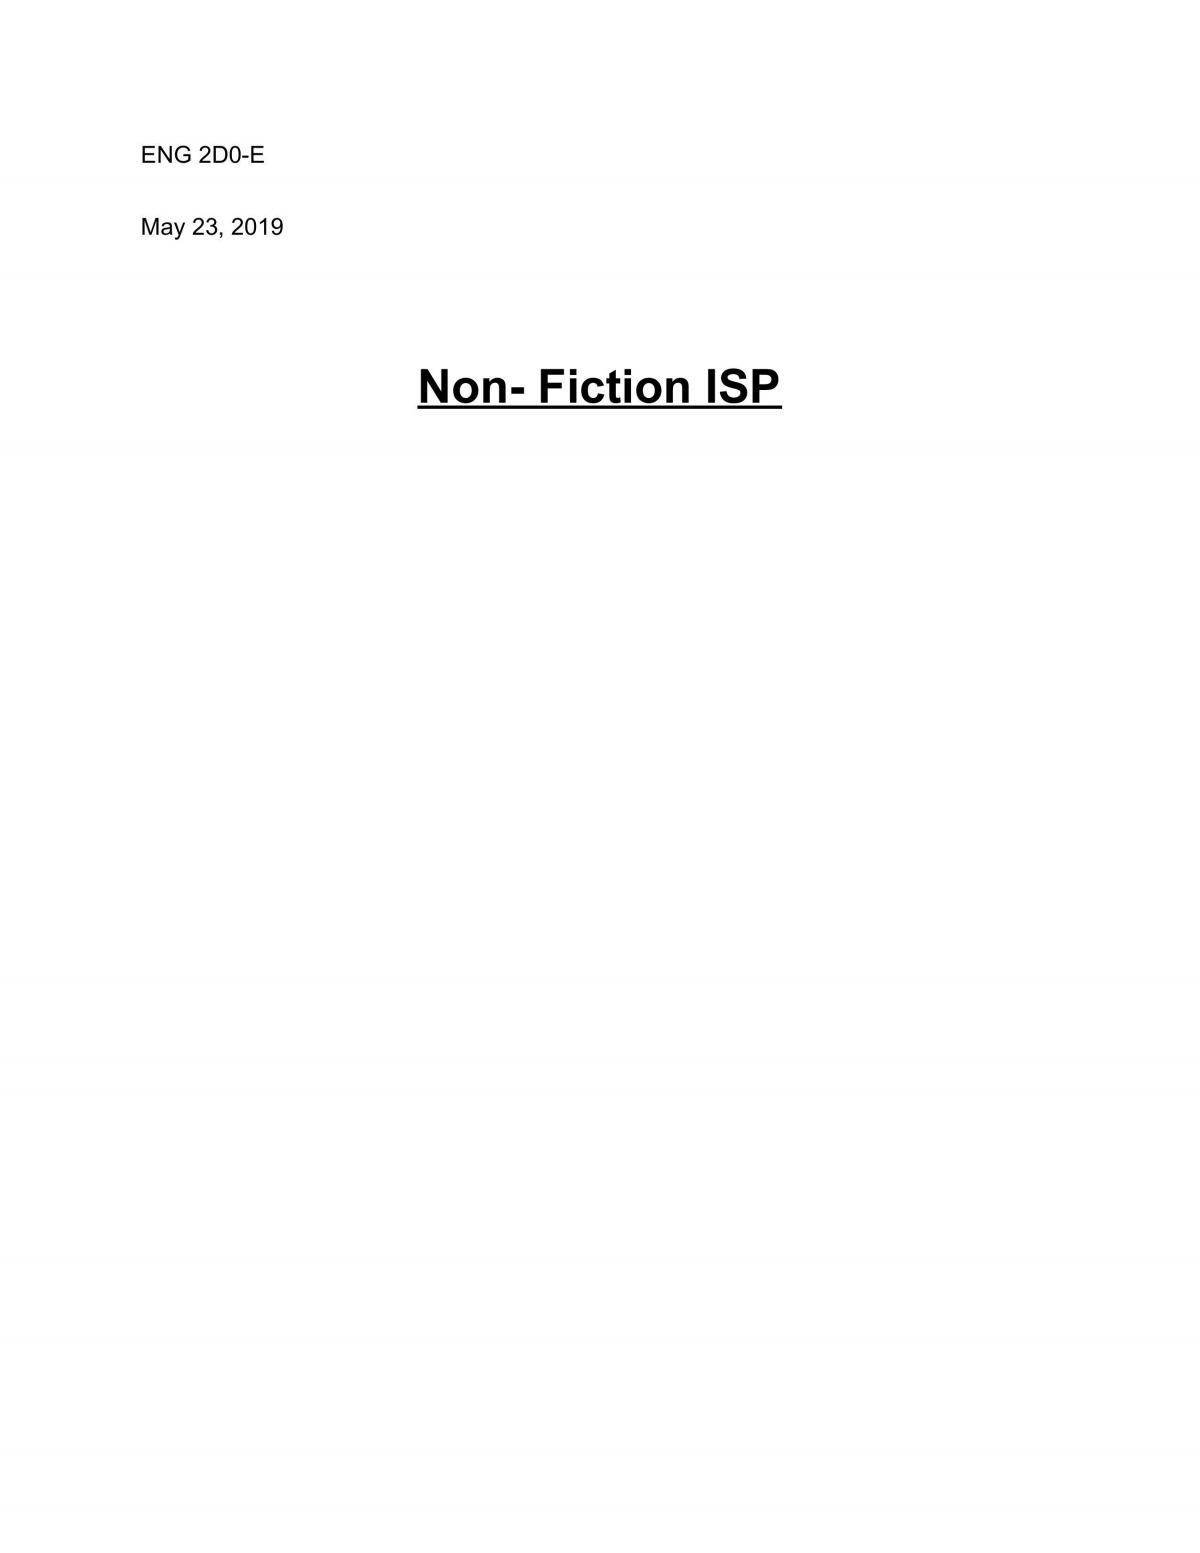 Non-Fiction ISP - Page 1